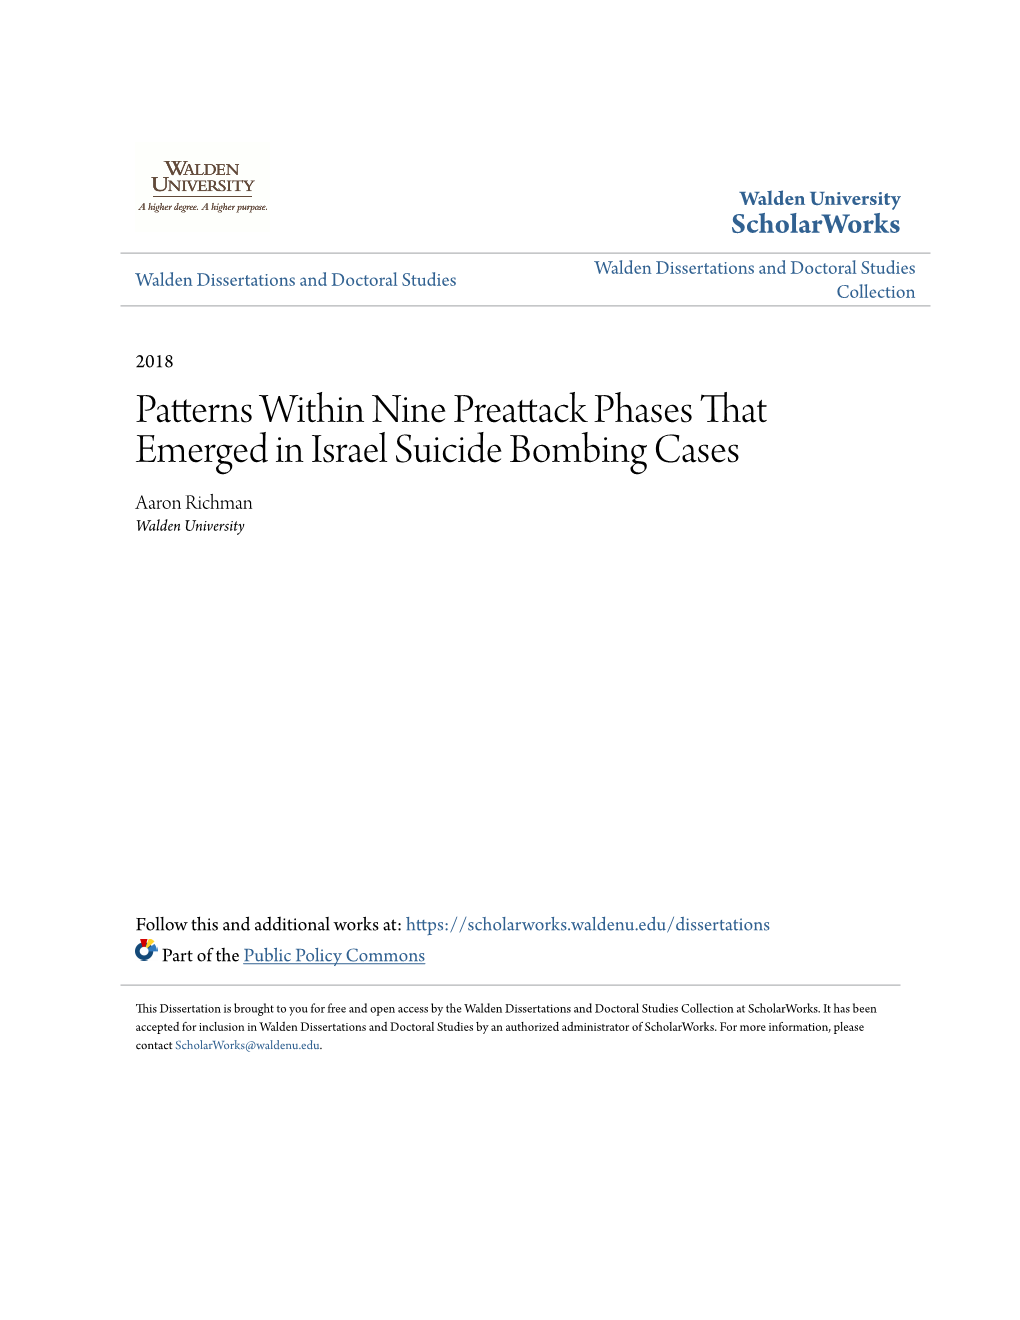 Patterns Within Nine Preattack Phases That Emerged in Israel Suicide Bombing Cases Aaron Richman Walden University